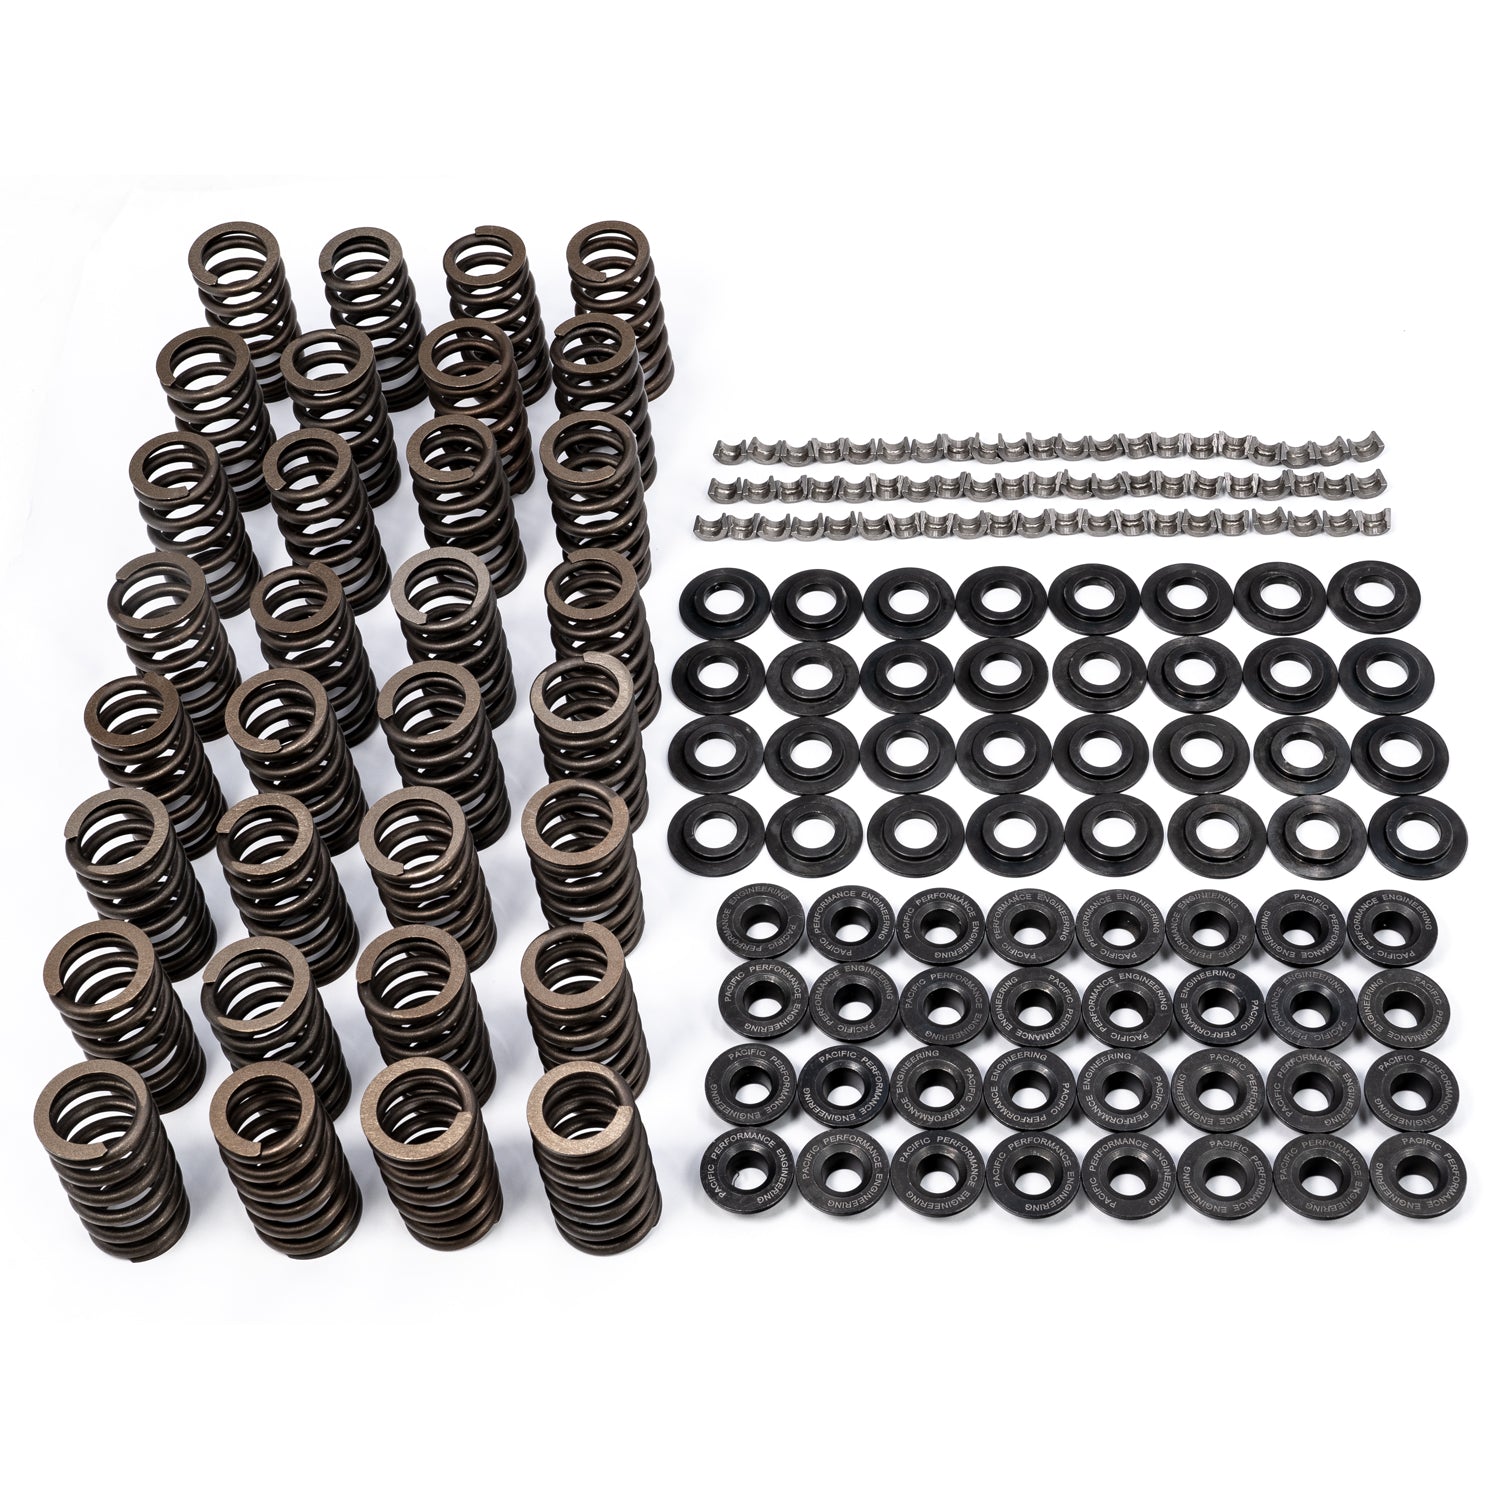 PPE Diesel 2001-2016 GM 6.6L Duramax Valve Springs, Retainers, and Keepers Complete Kit 110090050